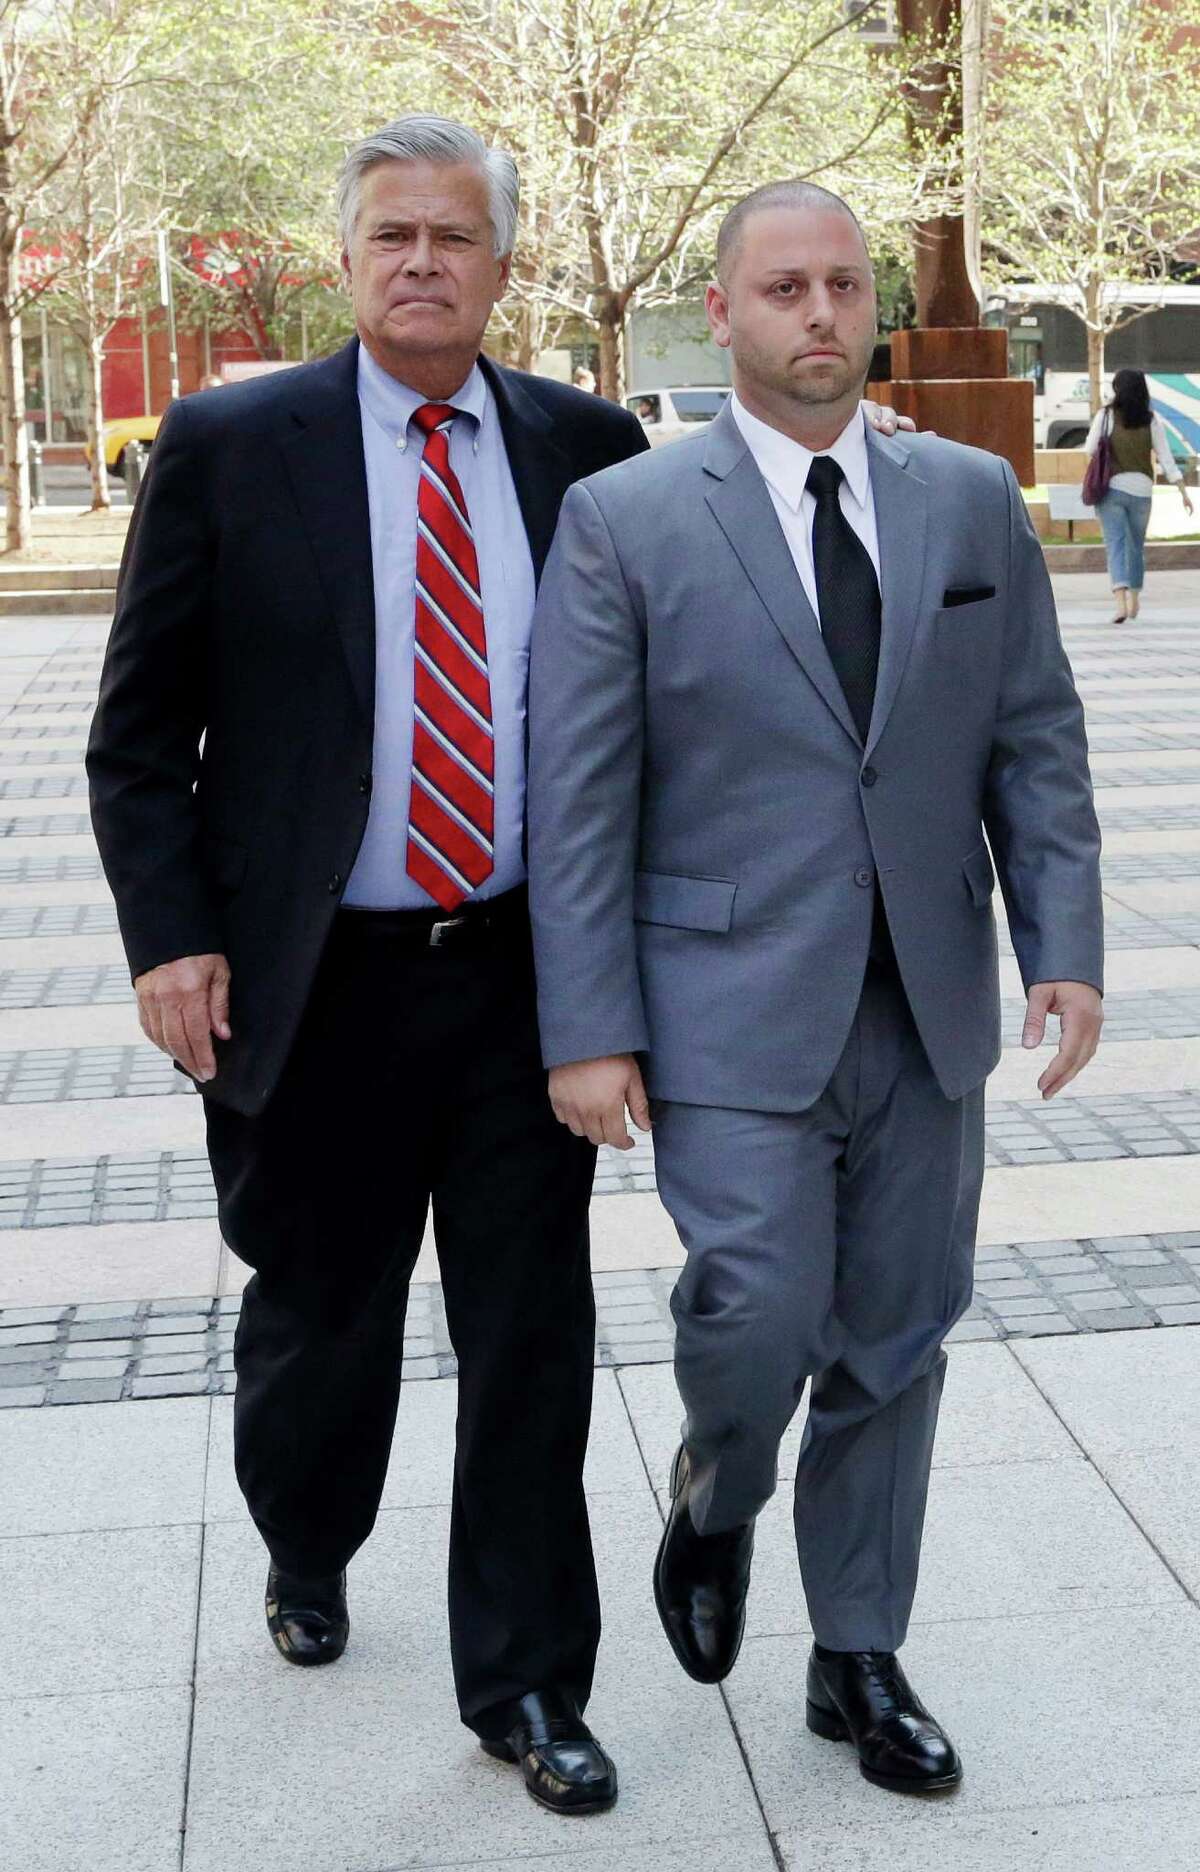 FILE- In this May 4, 2015 file photo, New York Senate Majority Leader Dean Skelos, left, and his son Adam arrive at FBI offices in New York. The pair surrendered to face charges including extortion and soliciting bribes amid a federal investigation into the awarding of a $12 million contract to a company that hired his son. In spite of the charges against him, people on Long Island are using words like "pillar of the community," and a "good guy" to describe the embattled New York Senate leader. (AP Photo/Mark Lennihan, File)